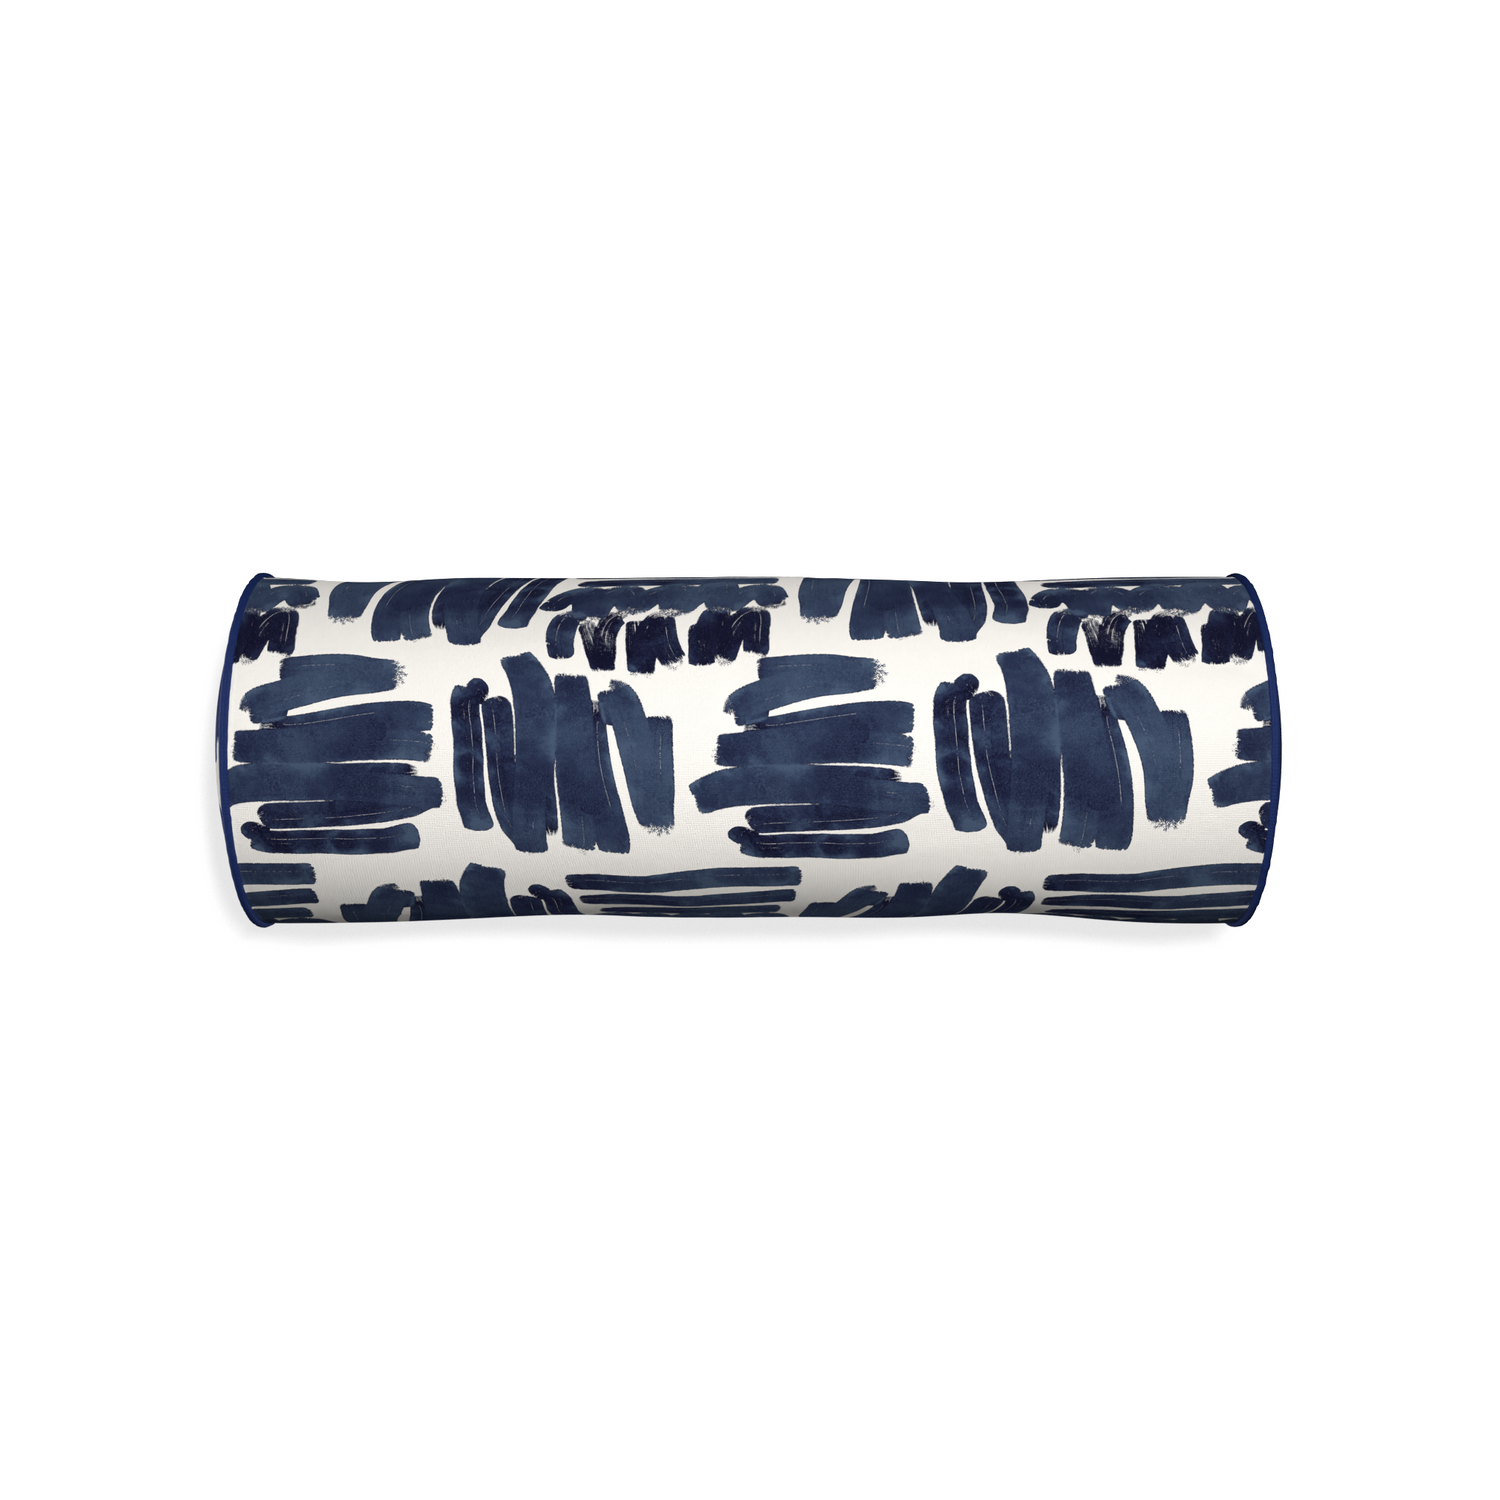 Bolster warby custom pillow with midnight piping on white background